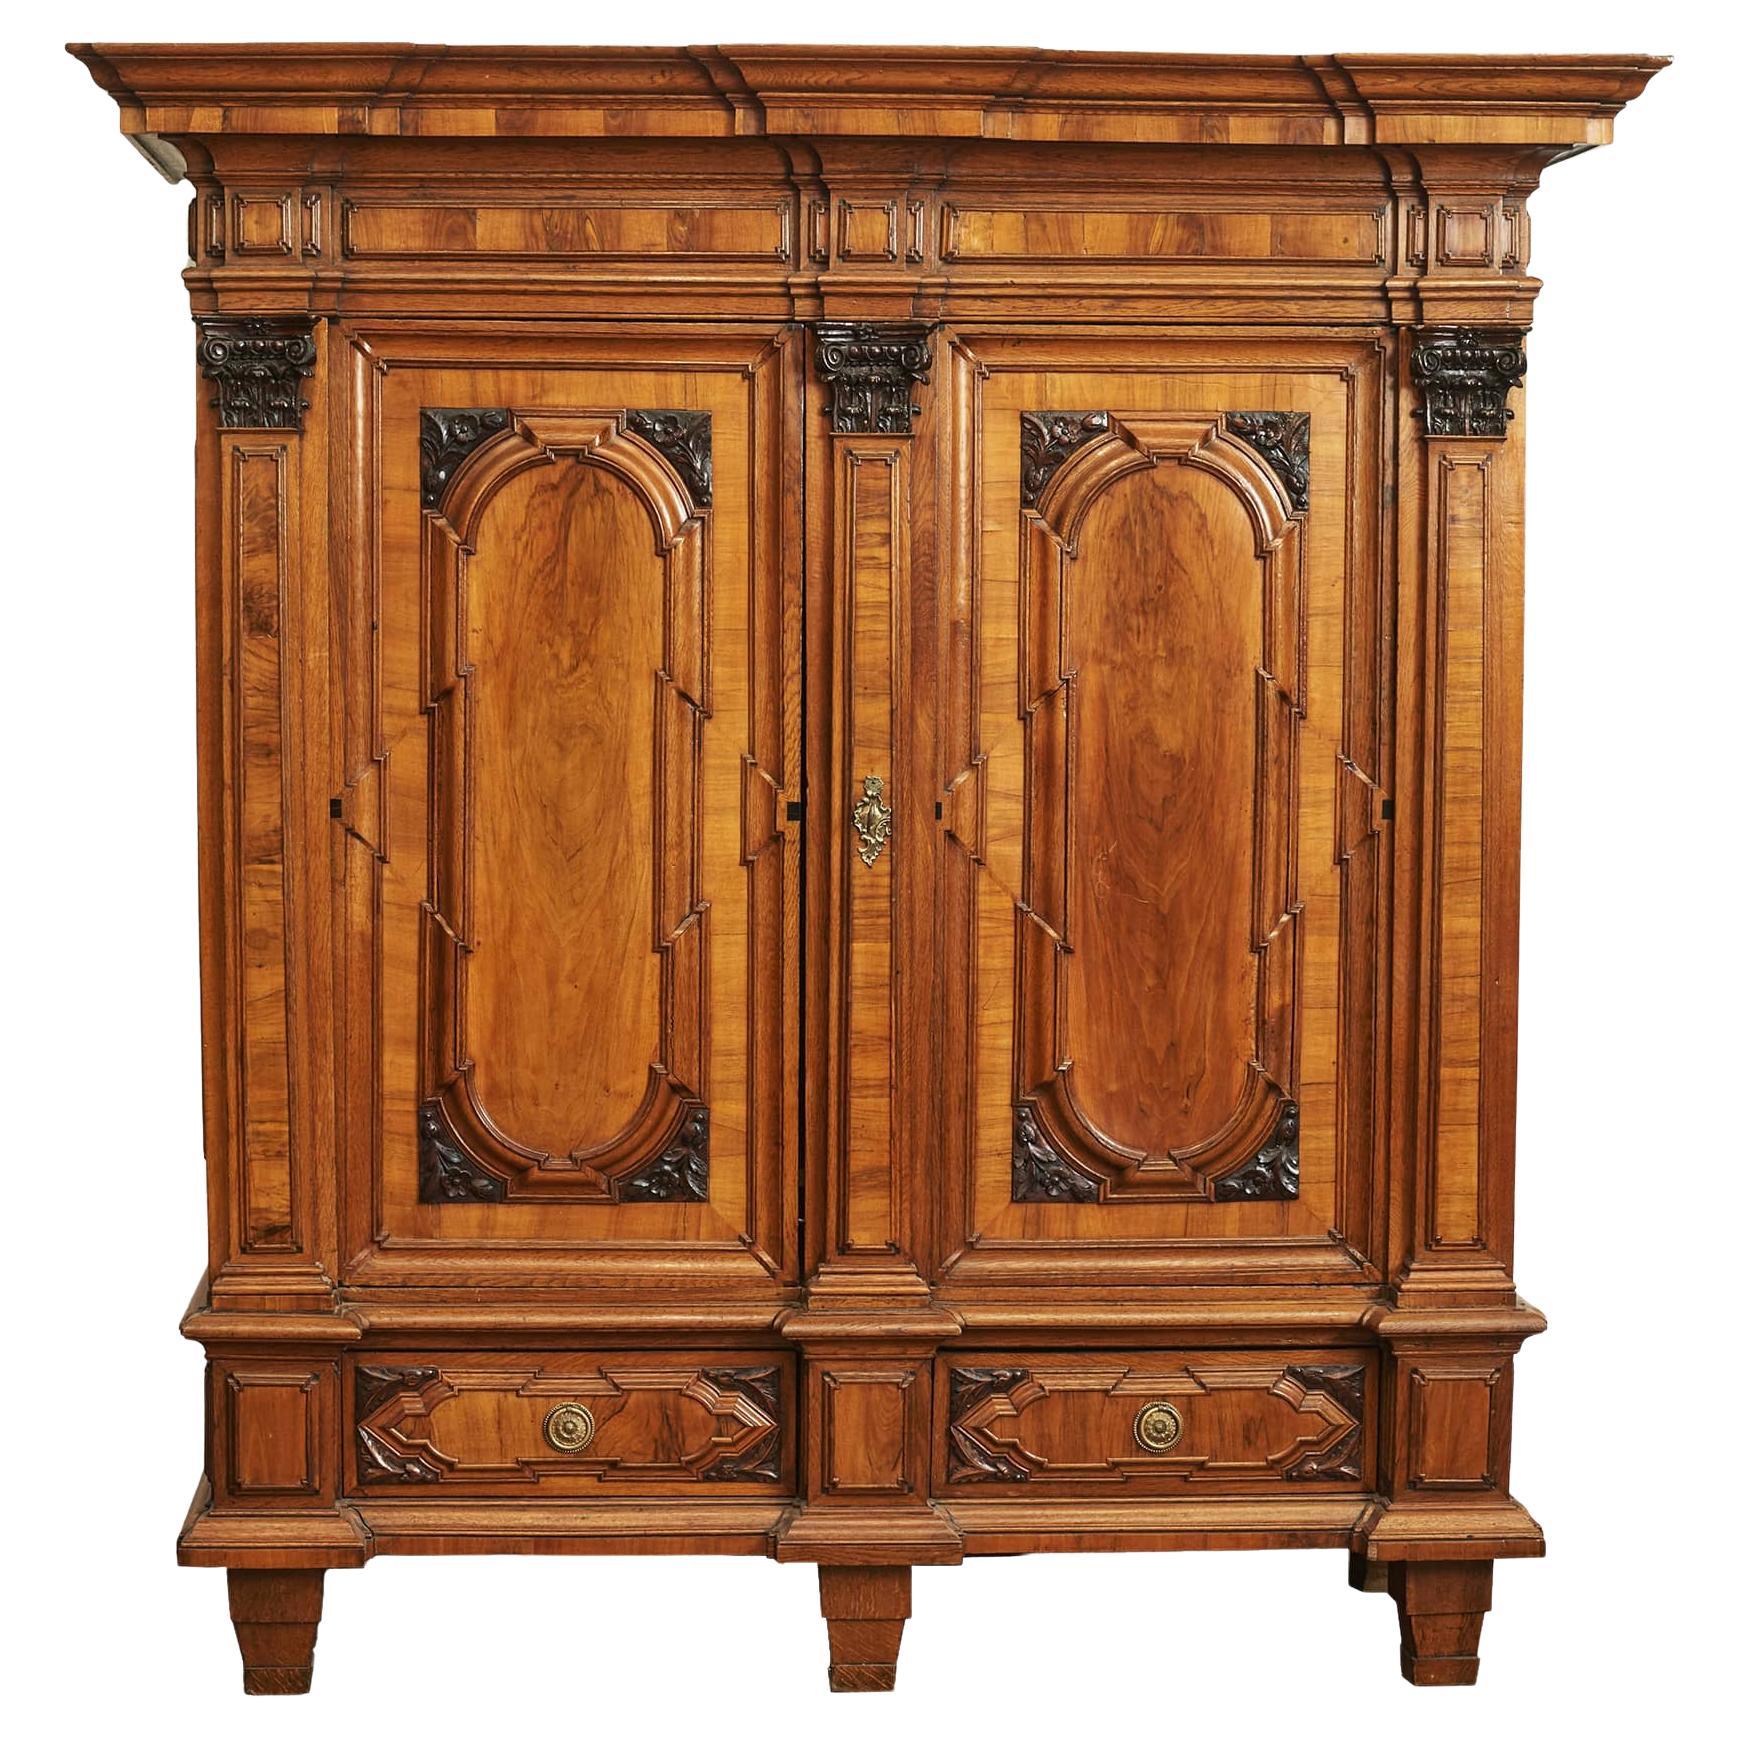 Danish 18th Century Baroque Manor House Kast or Armoire